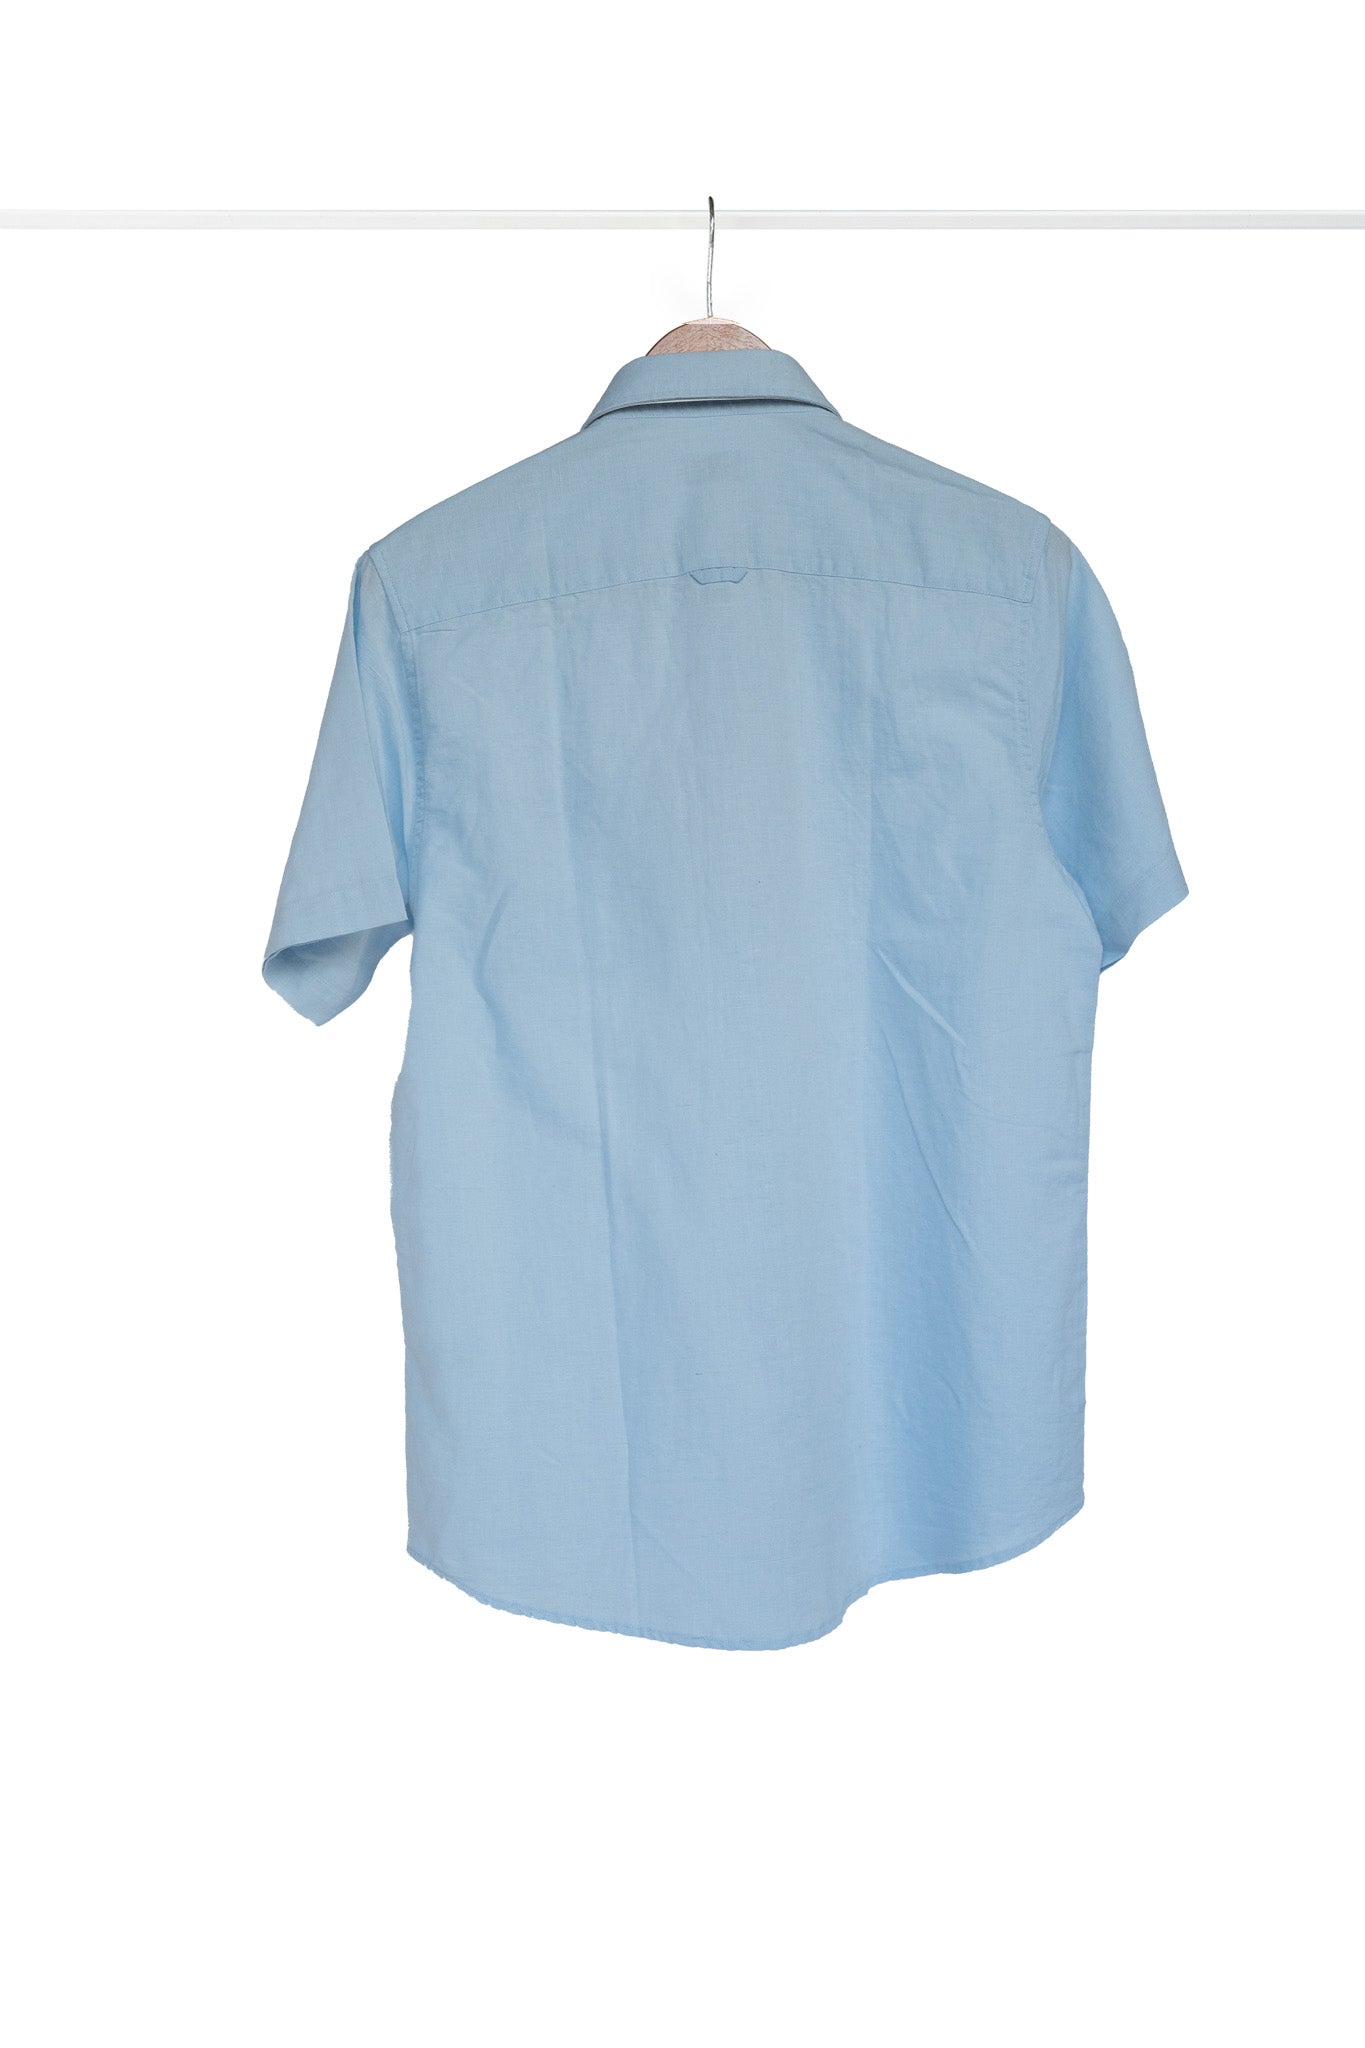 Bare Brown Cotton Linen Shirt, Slim Fit with Half Sleeves - Light Blue